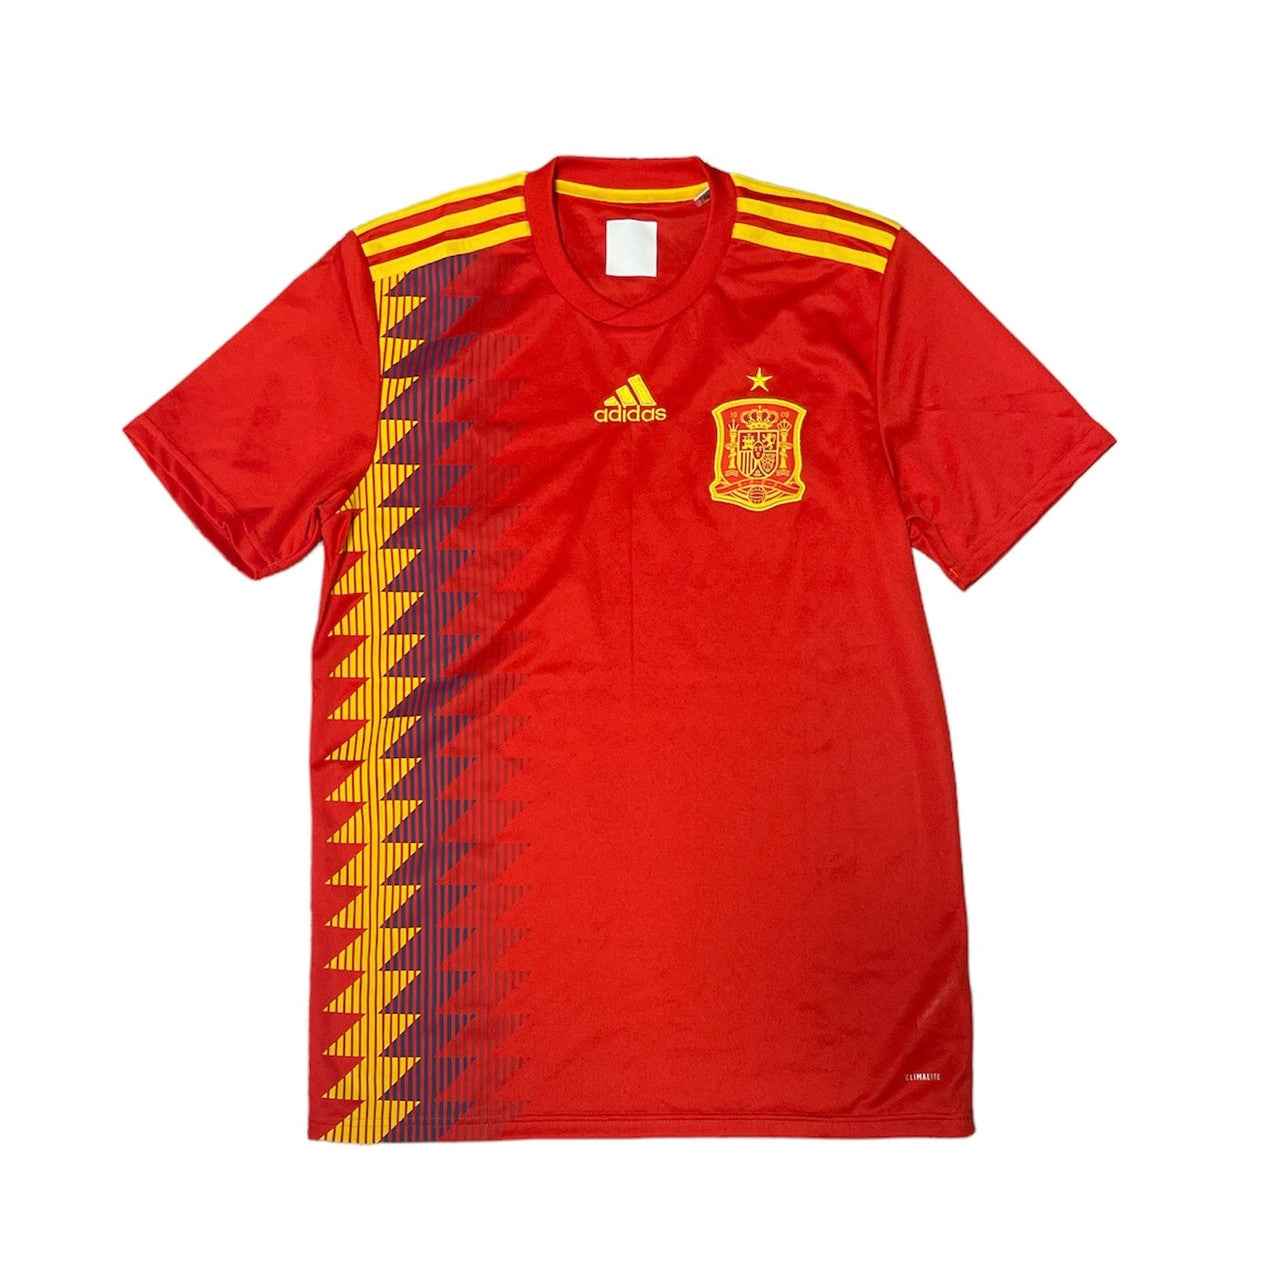 Adidas Spain 2018 World Cup Jersey